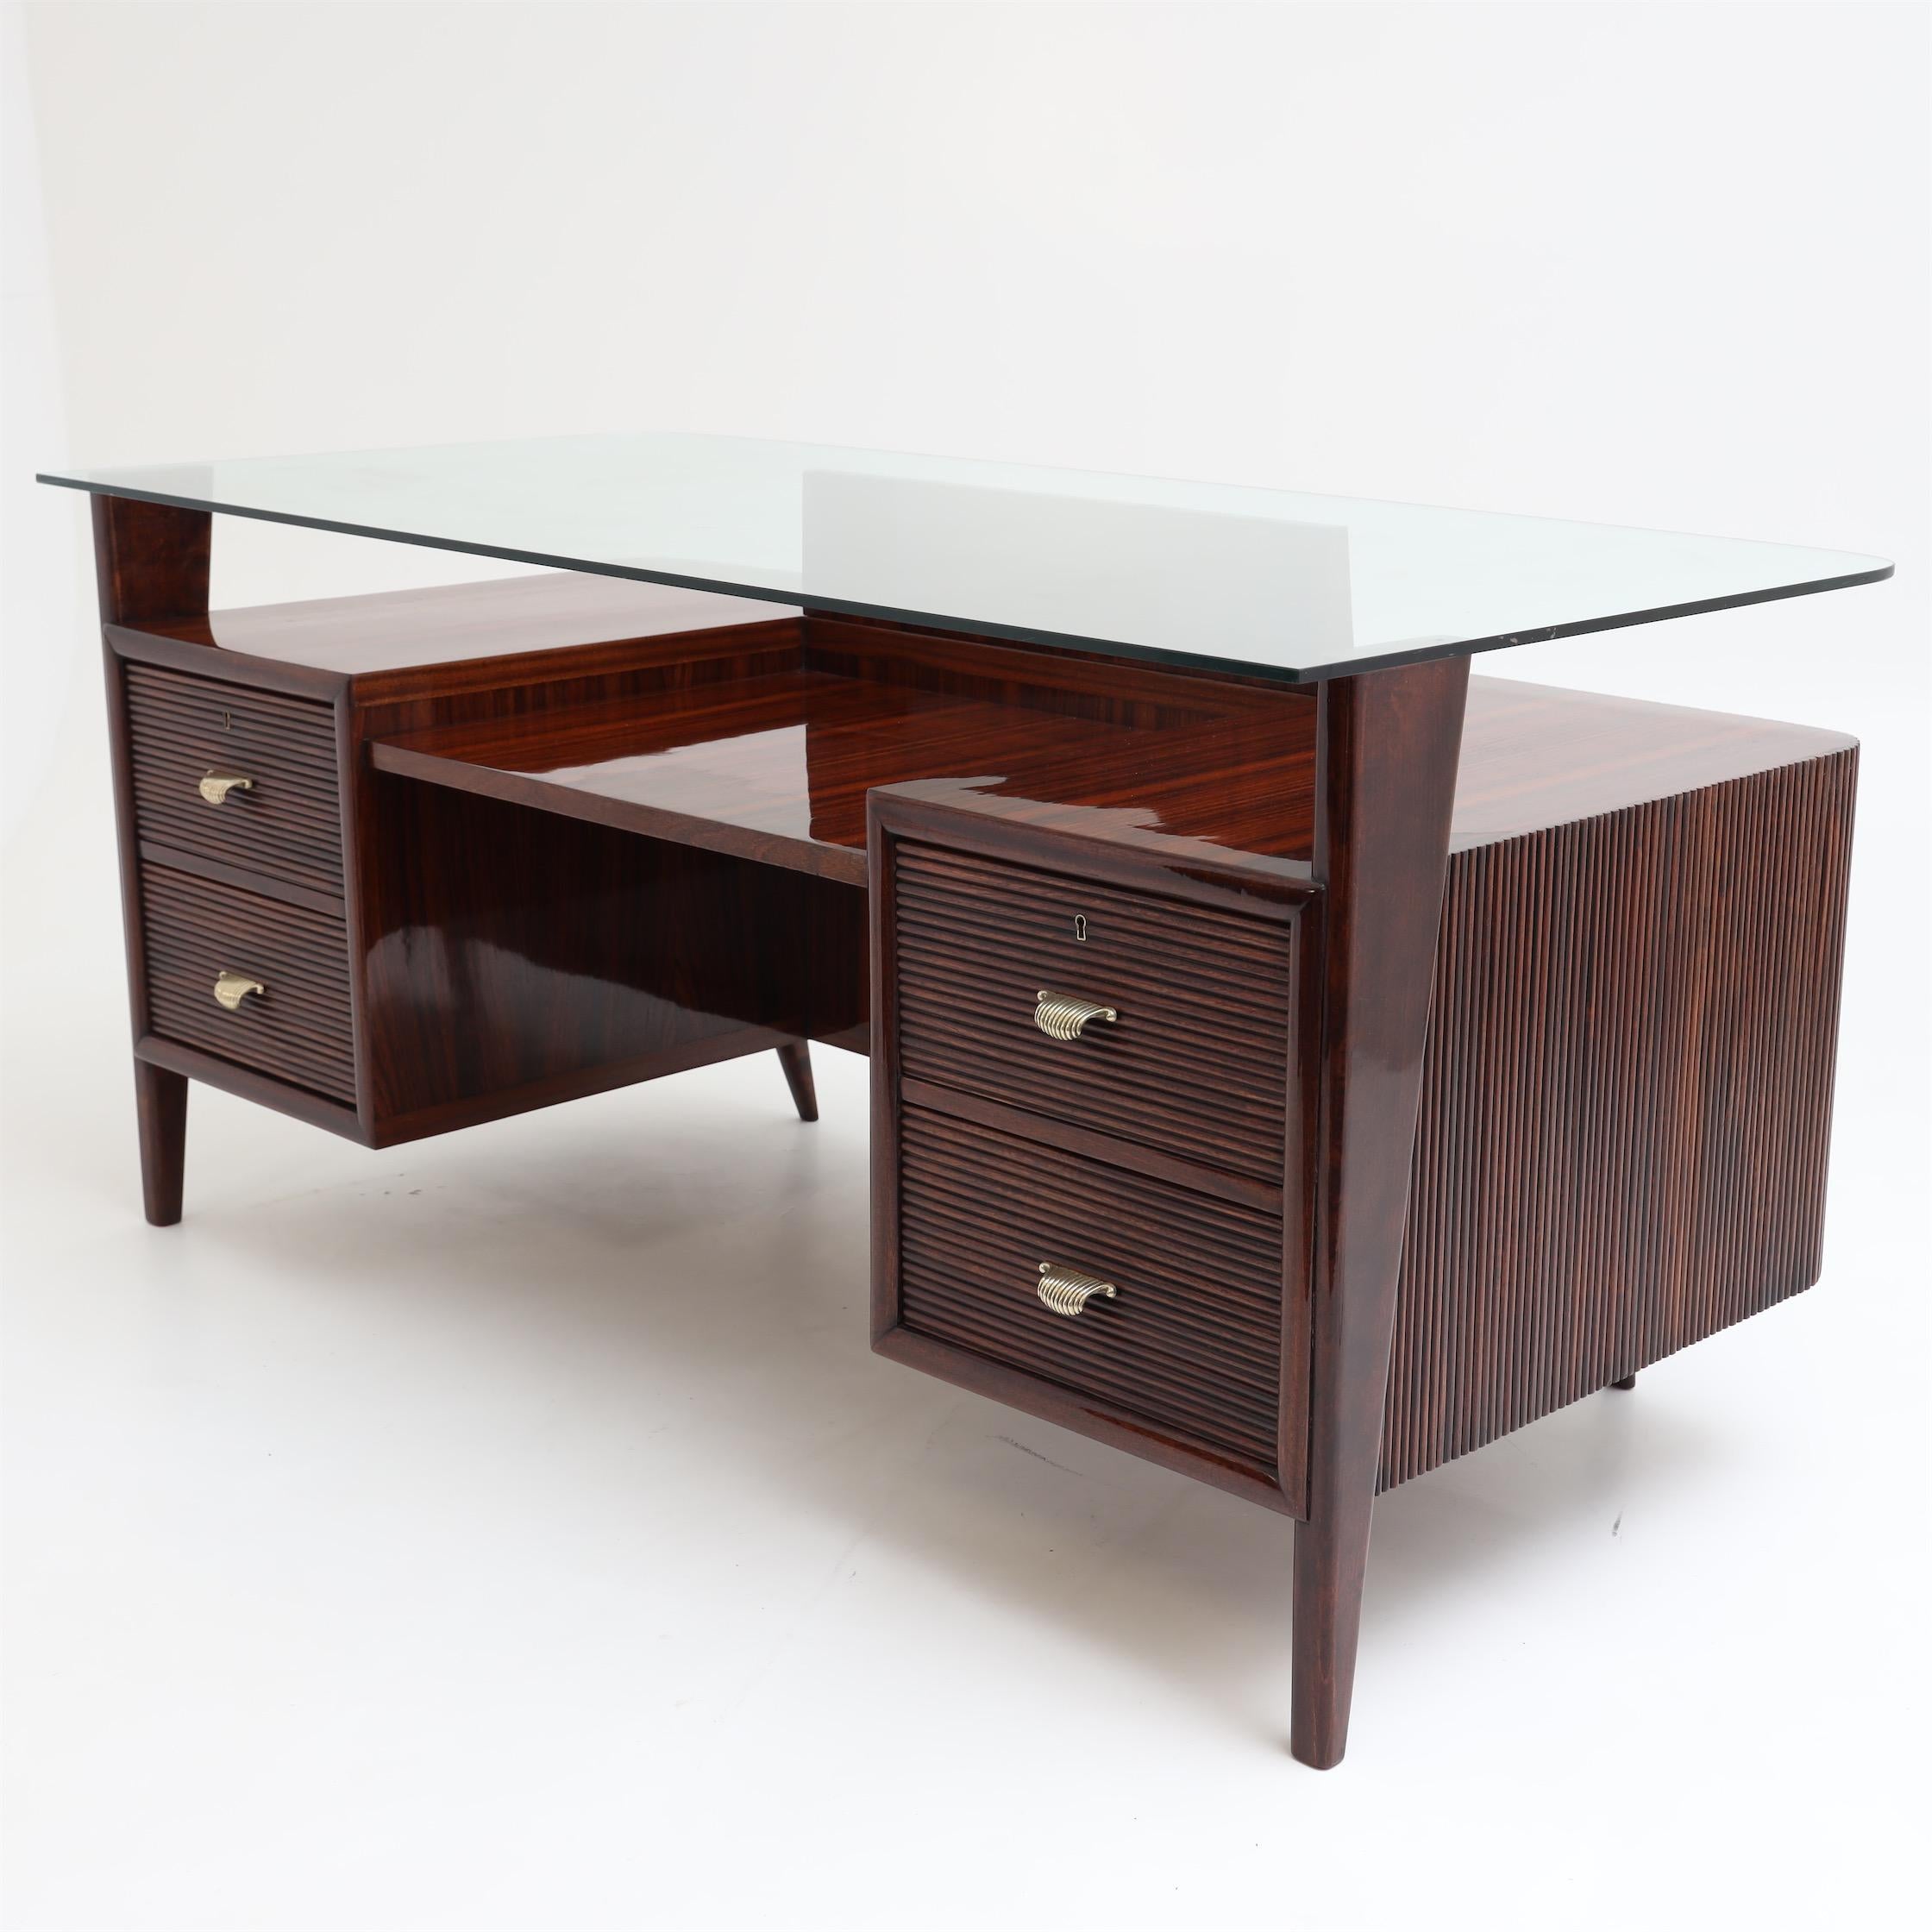 Mid-20th Century Desk, Attributed to Paolo Buffa, Italy, 1950s